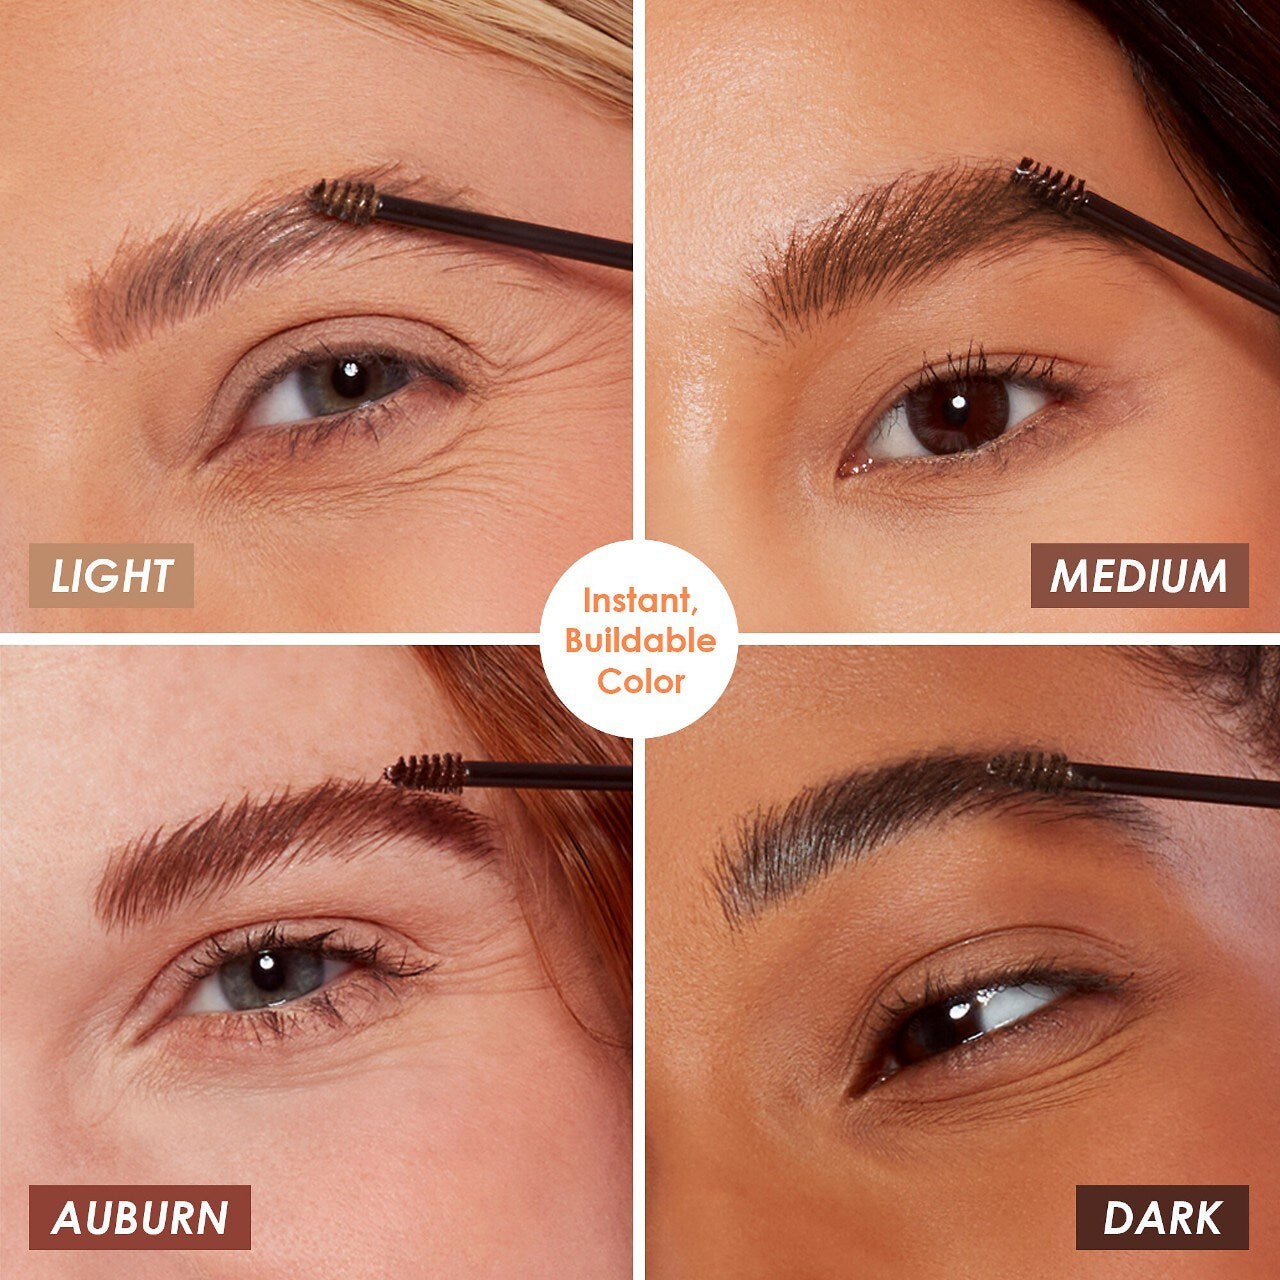 Comparison of Brow Serum Colors - call for details